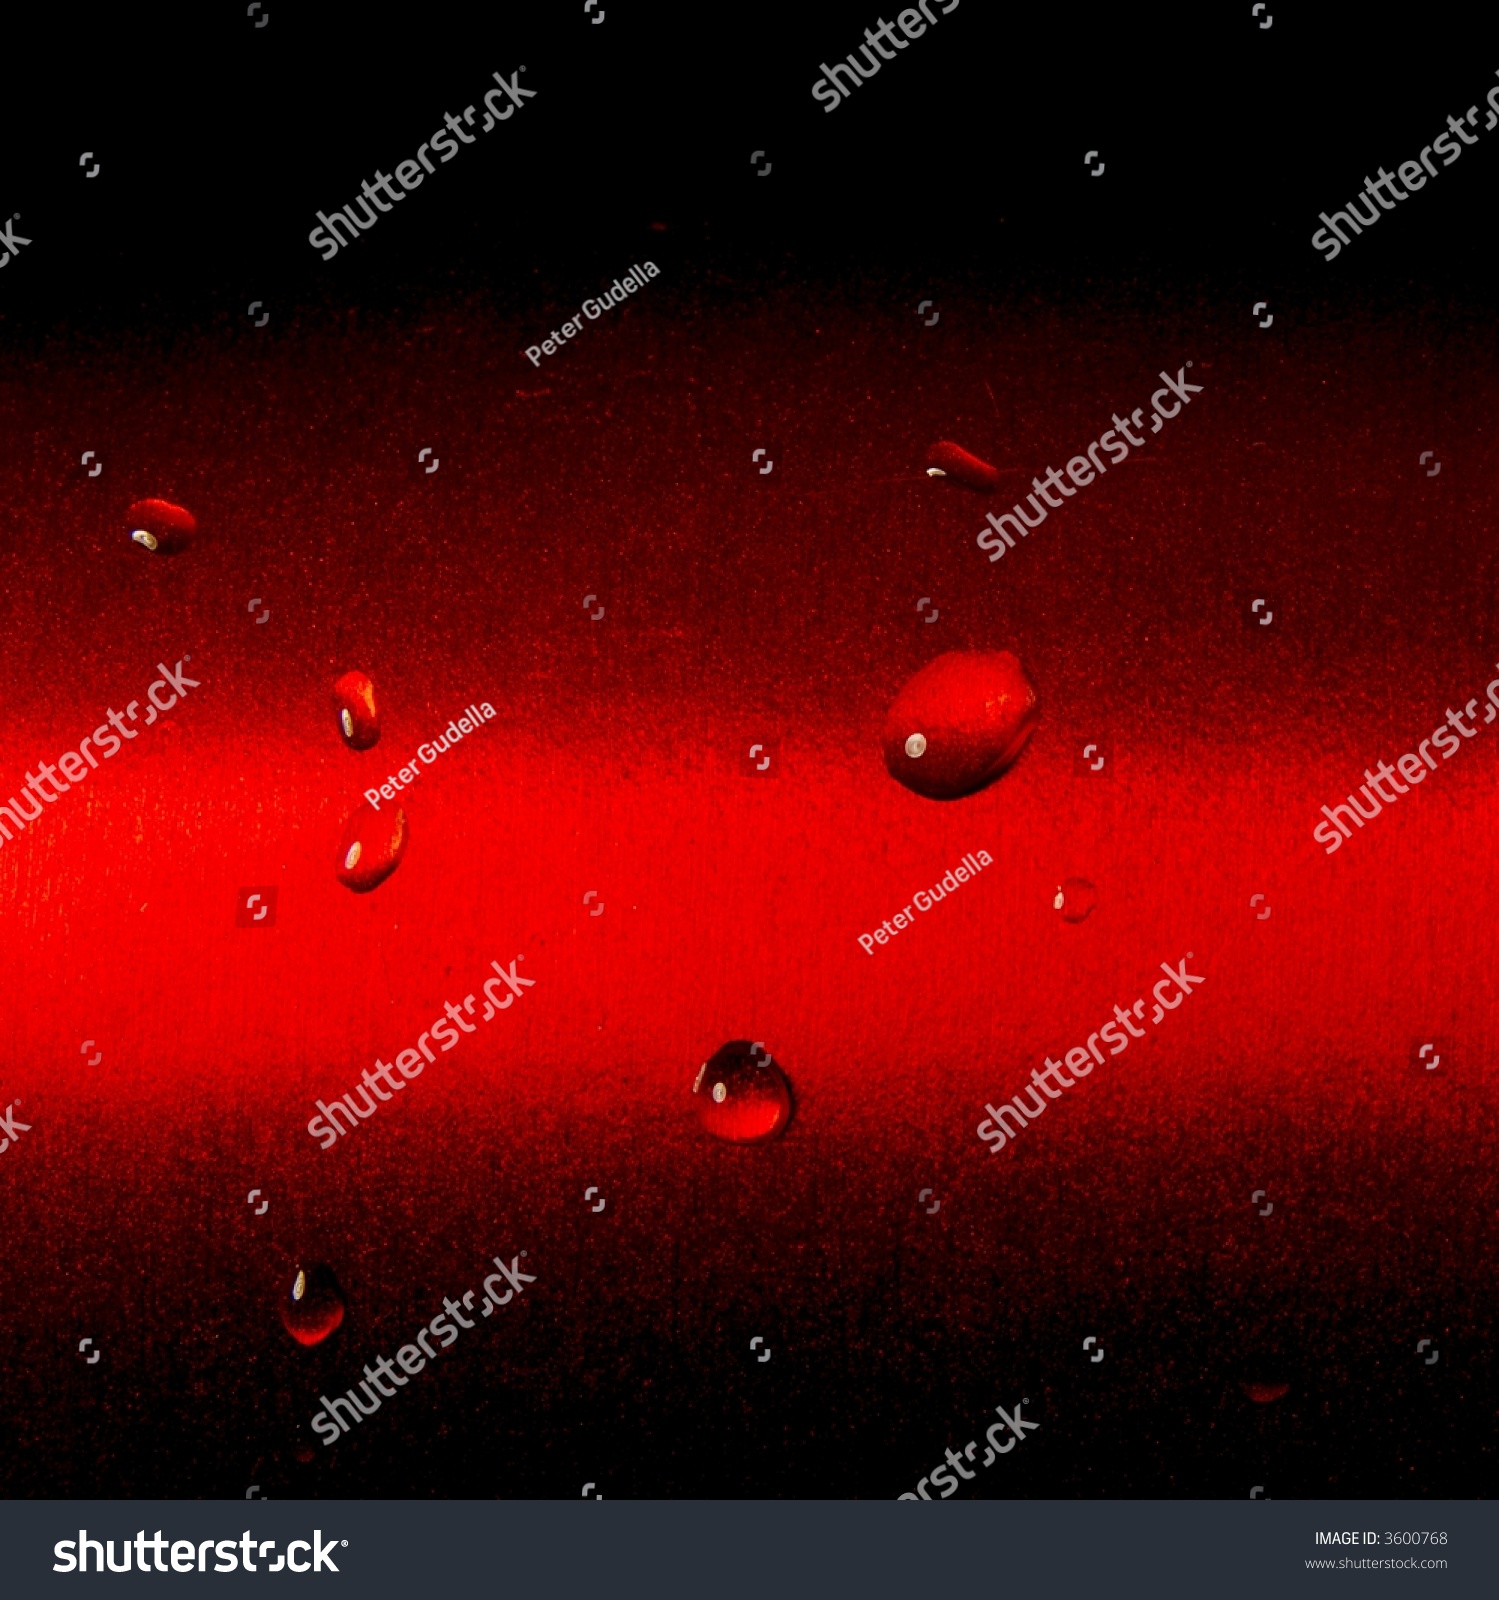 Some Raindrops On Red Metallic Surface Stock Photo (Royalty Free ...